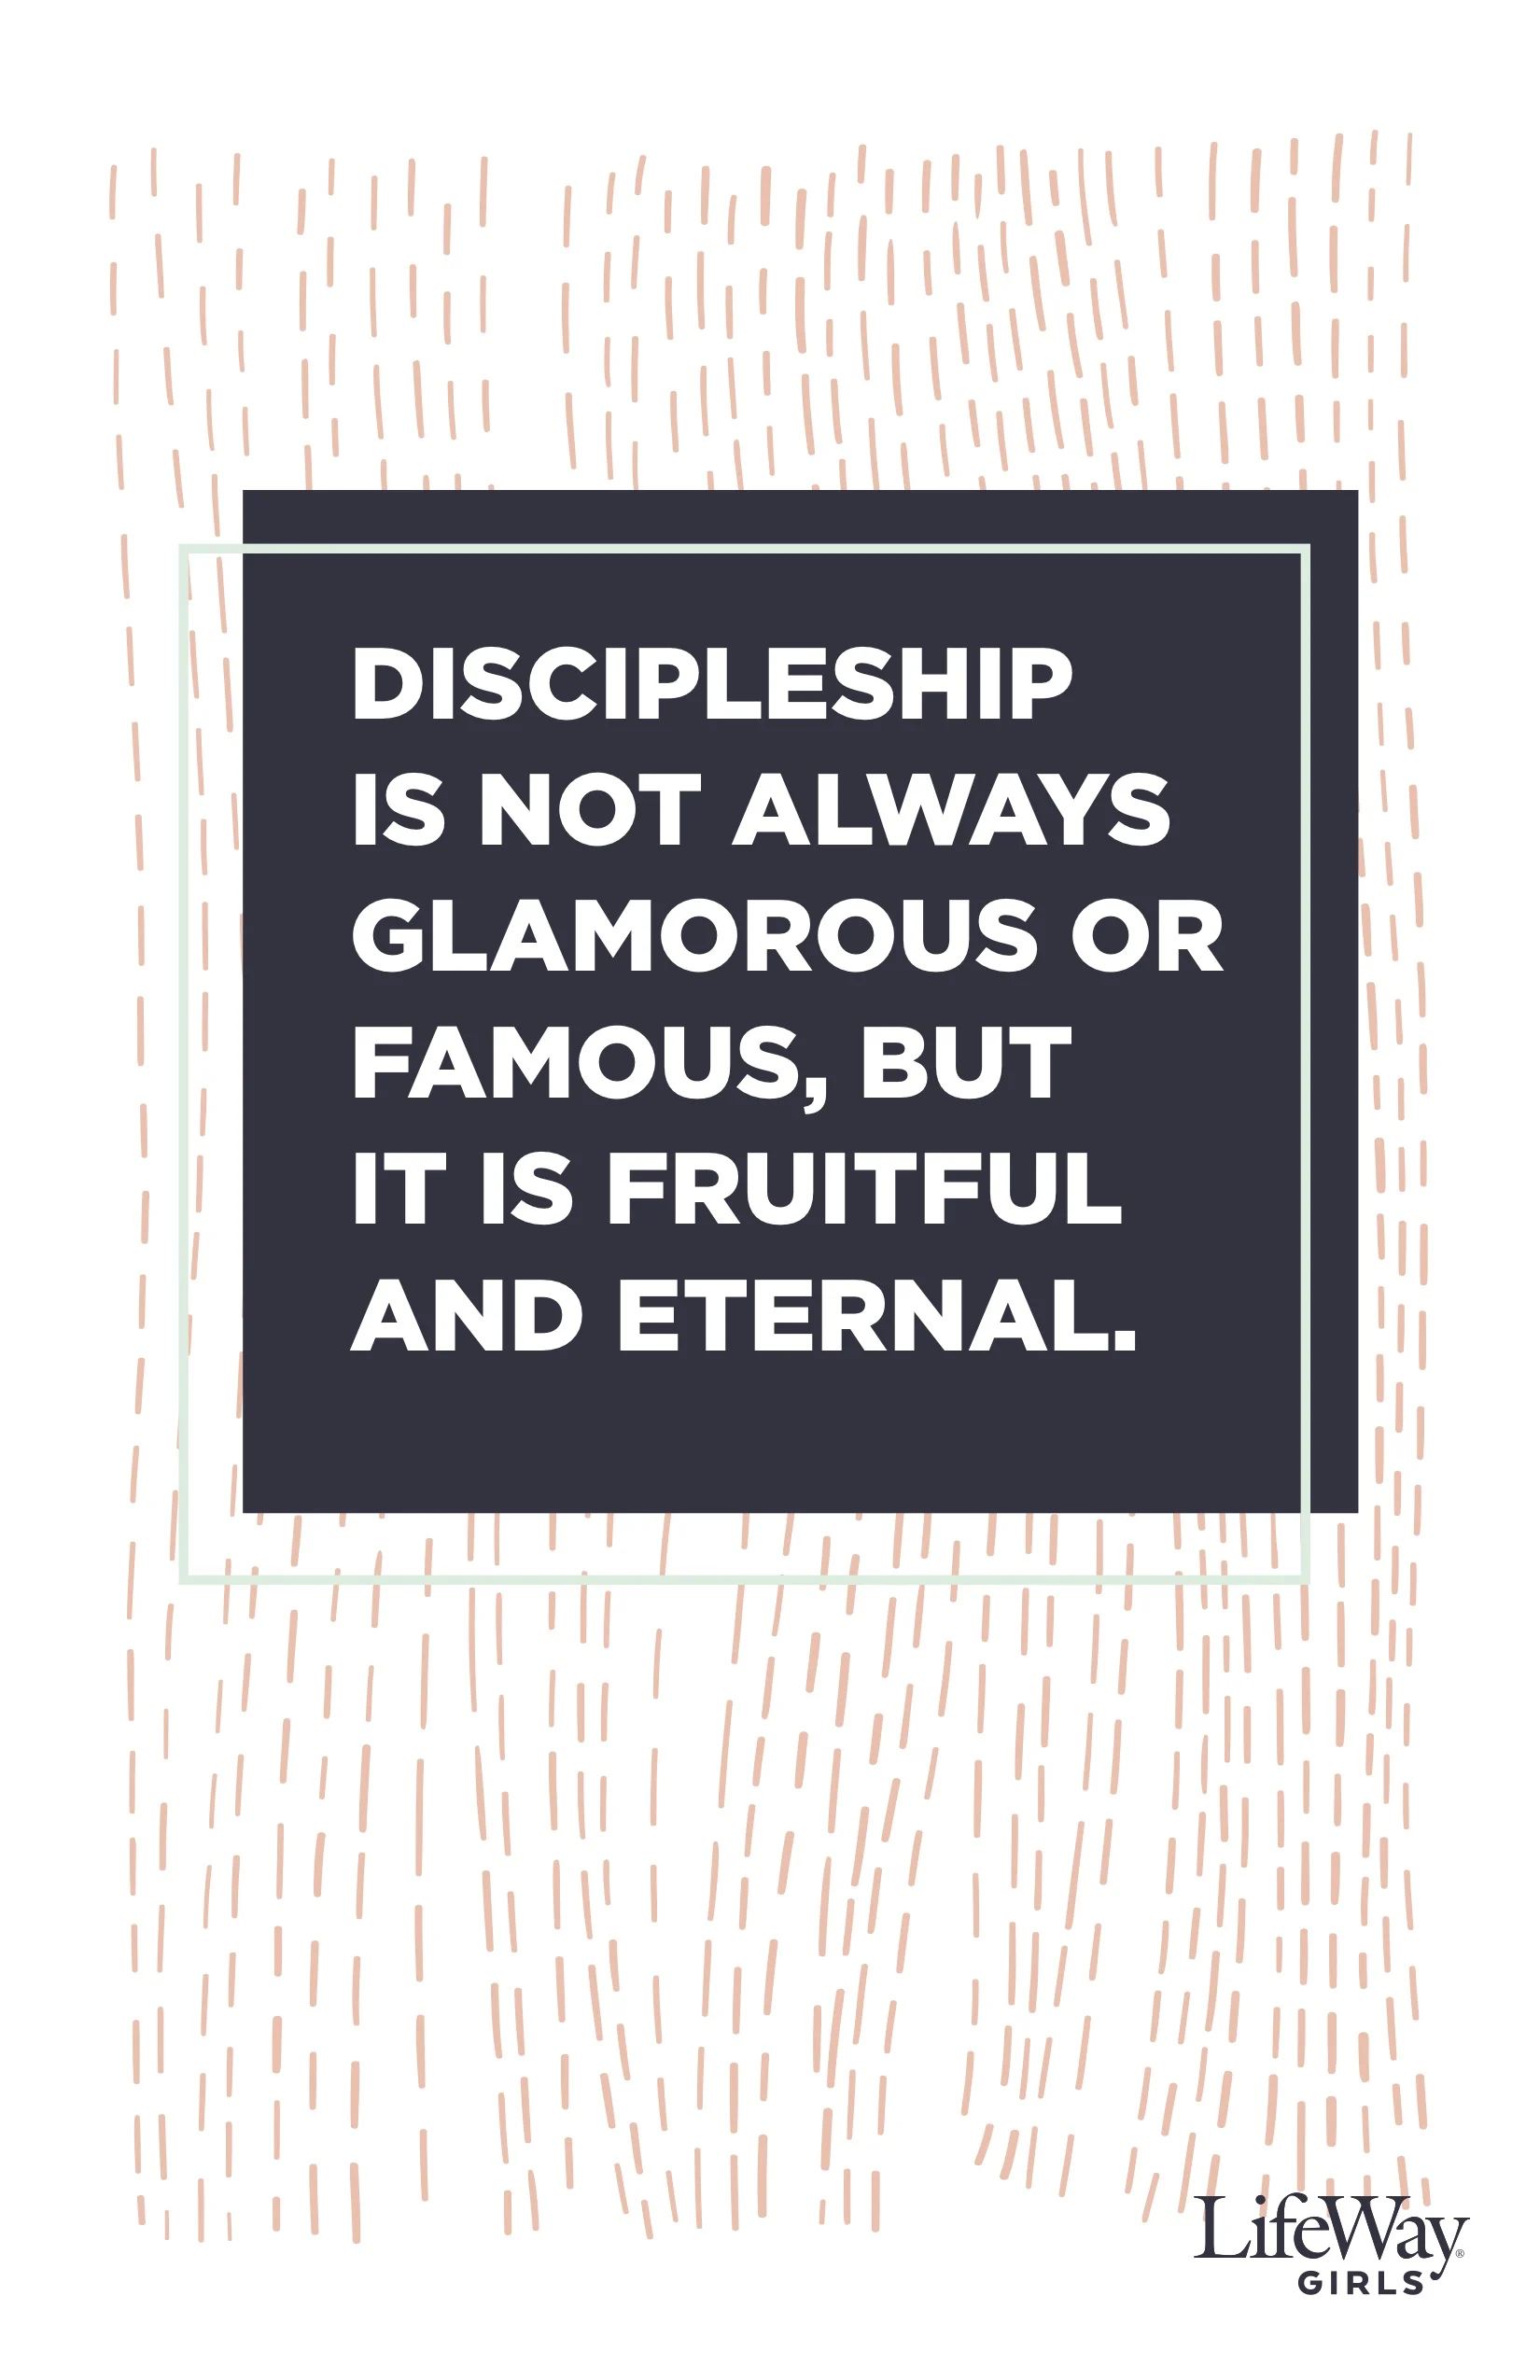 Discipleship is not always glamorous or famous, but it is fruitful and eternal.